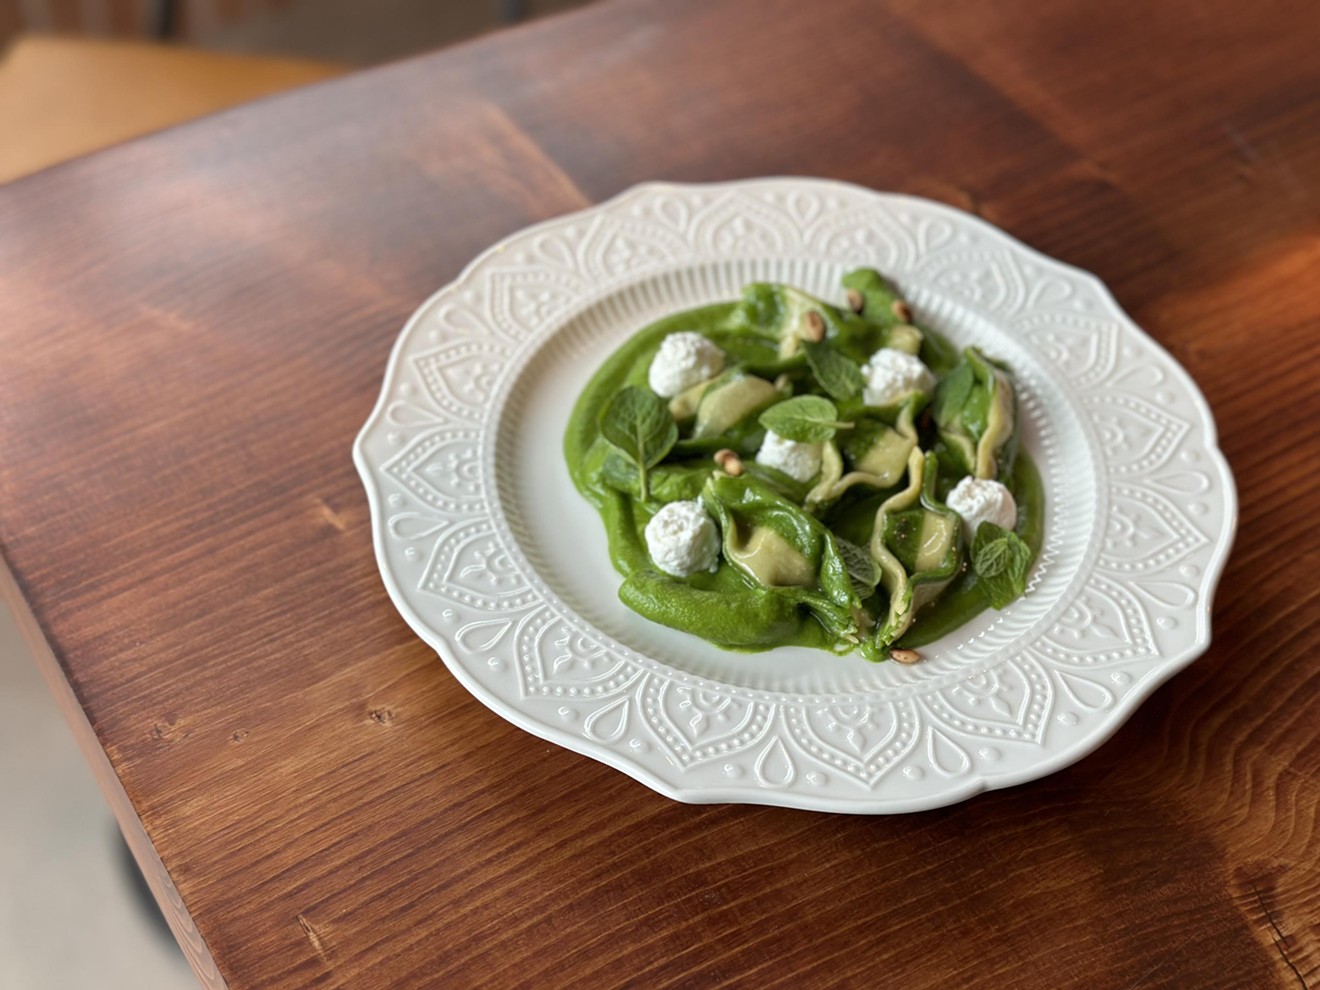 Caramelle stuffed with ricotta in a pesto sauce from Gusto.